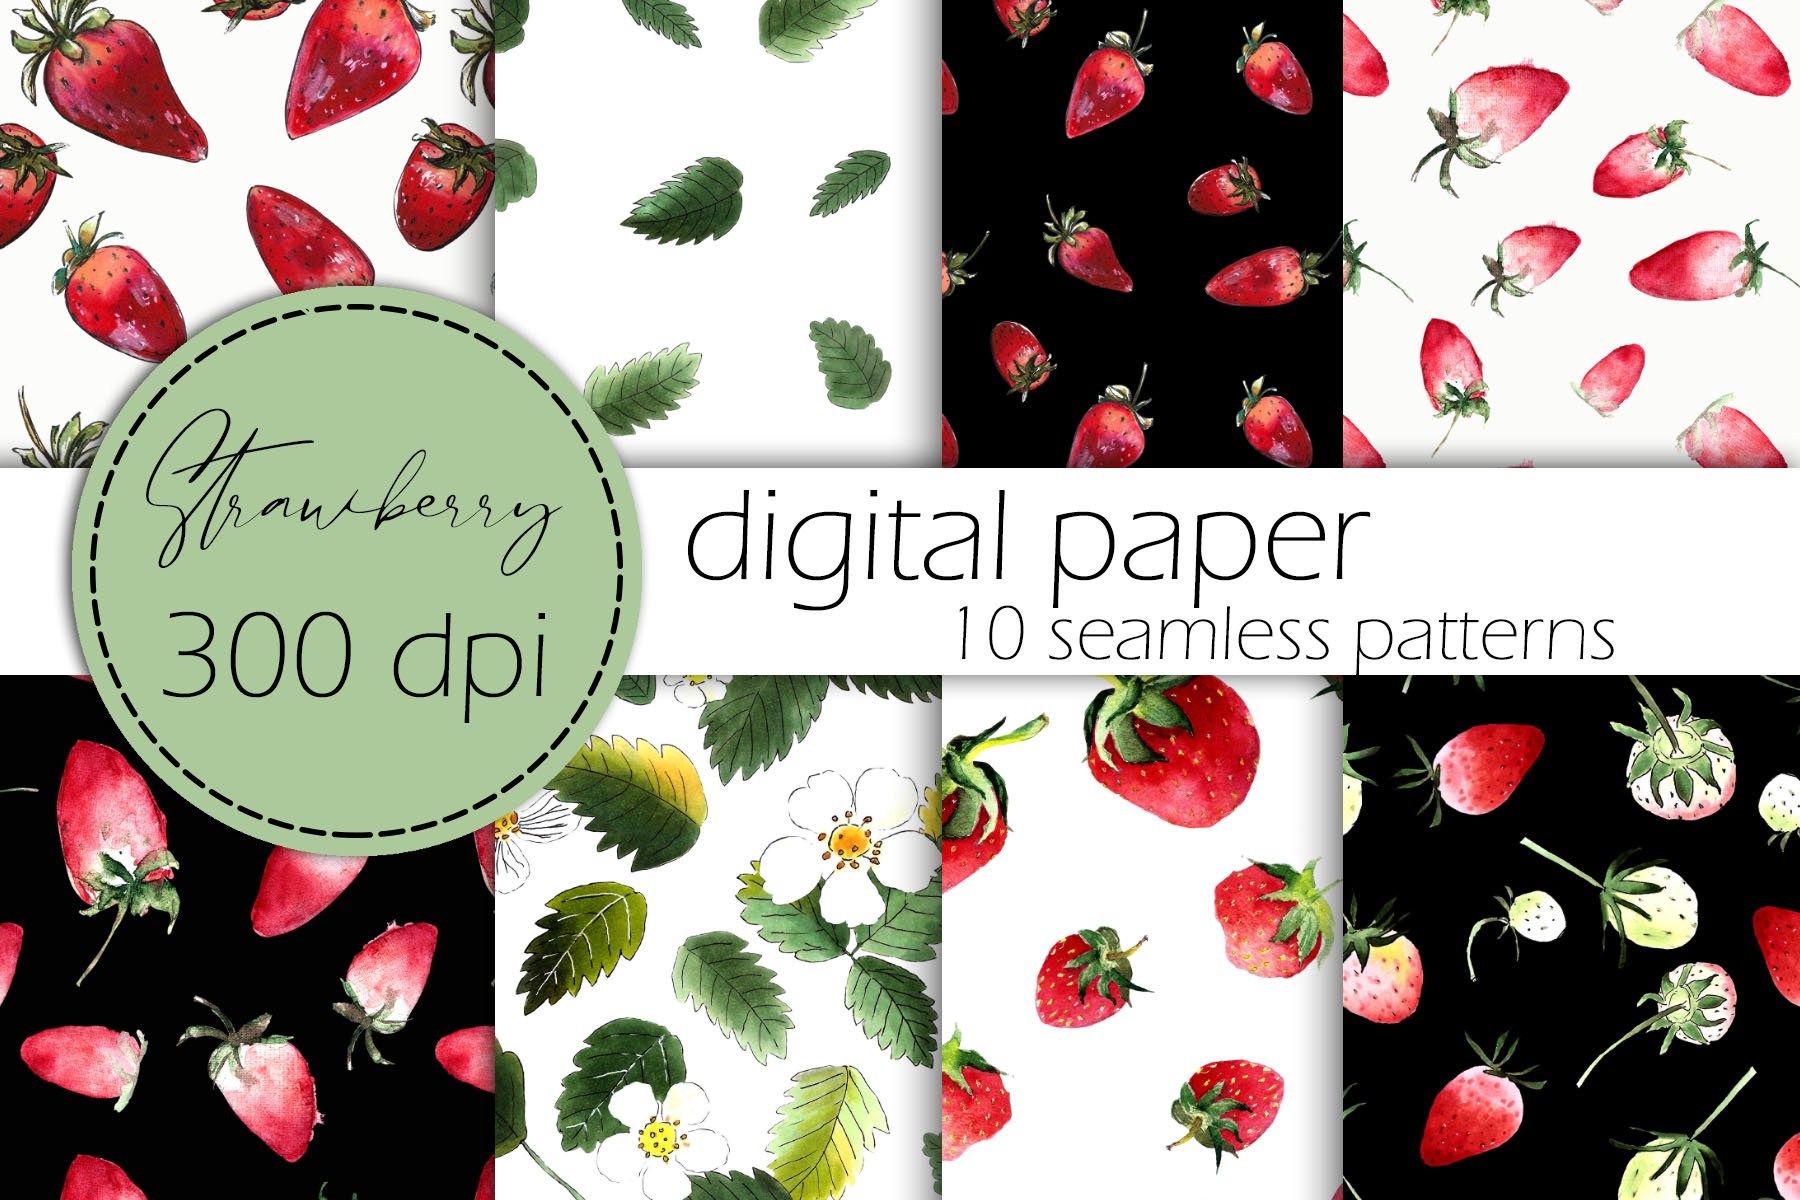 8 different seamless patterns and black lettering "Strawberry Digital Paper".